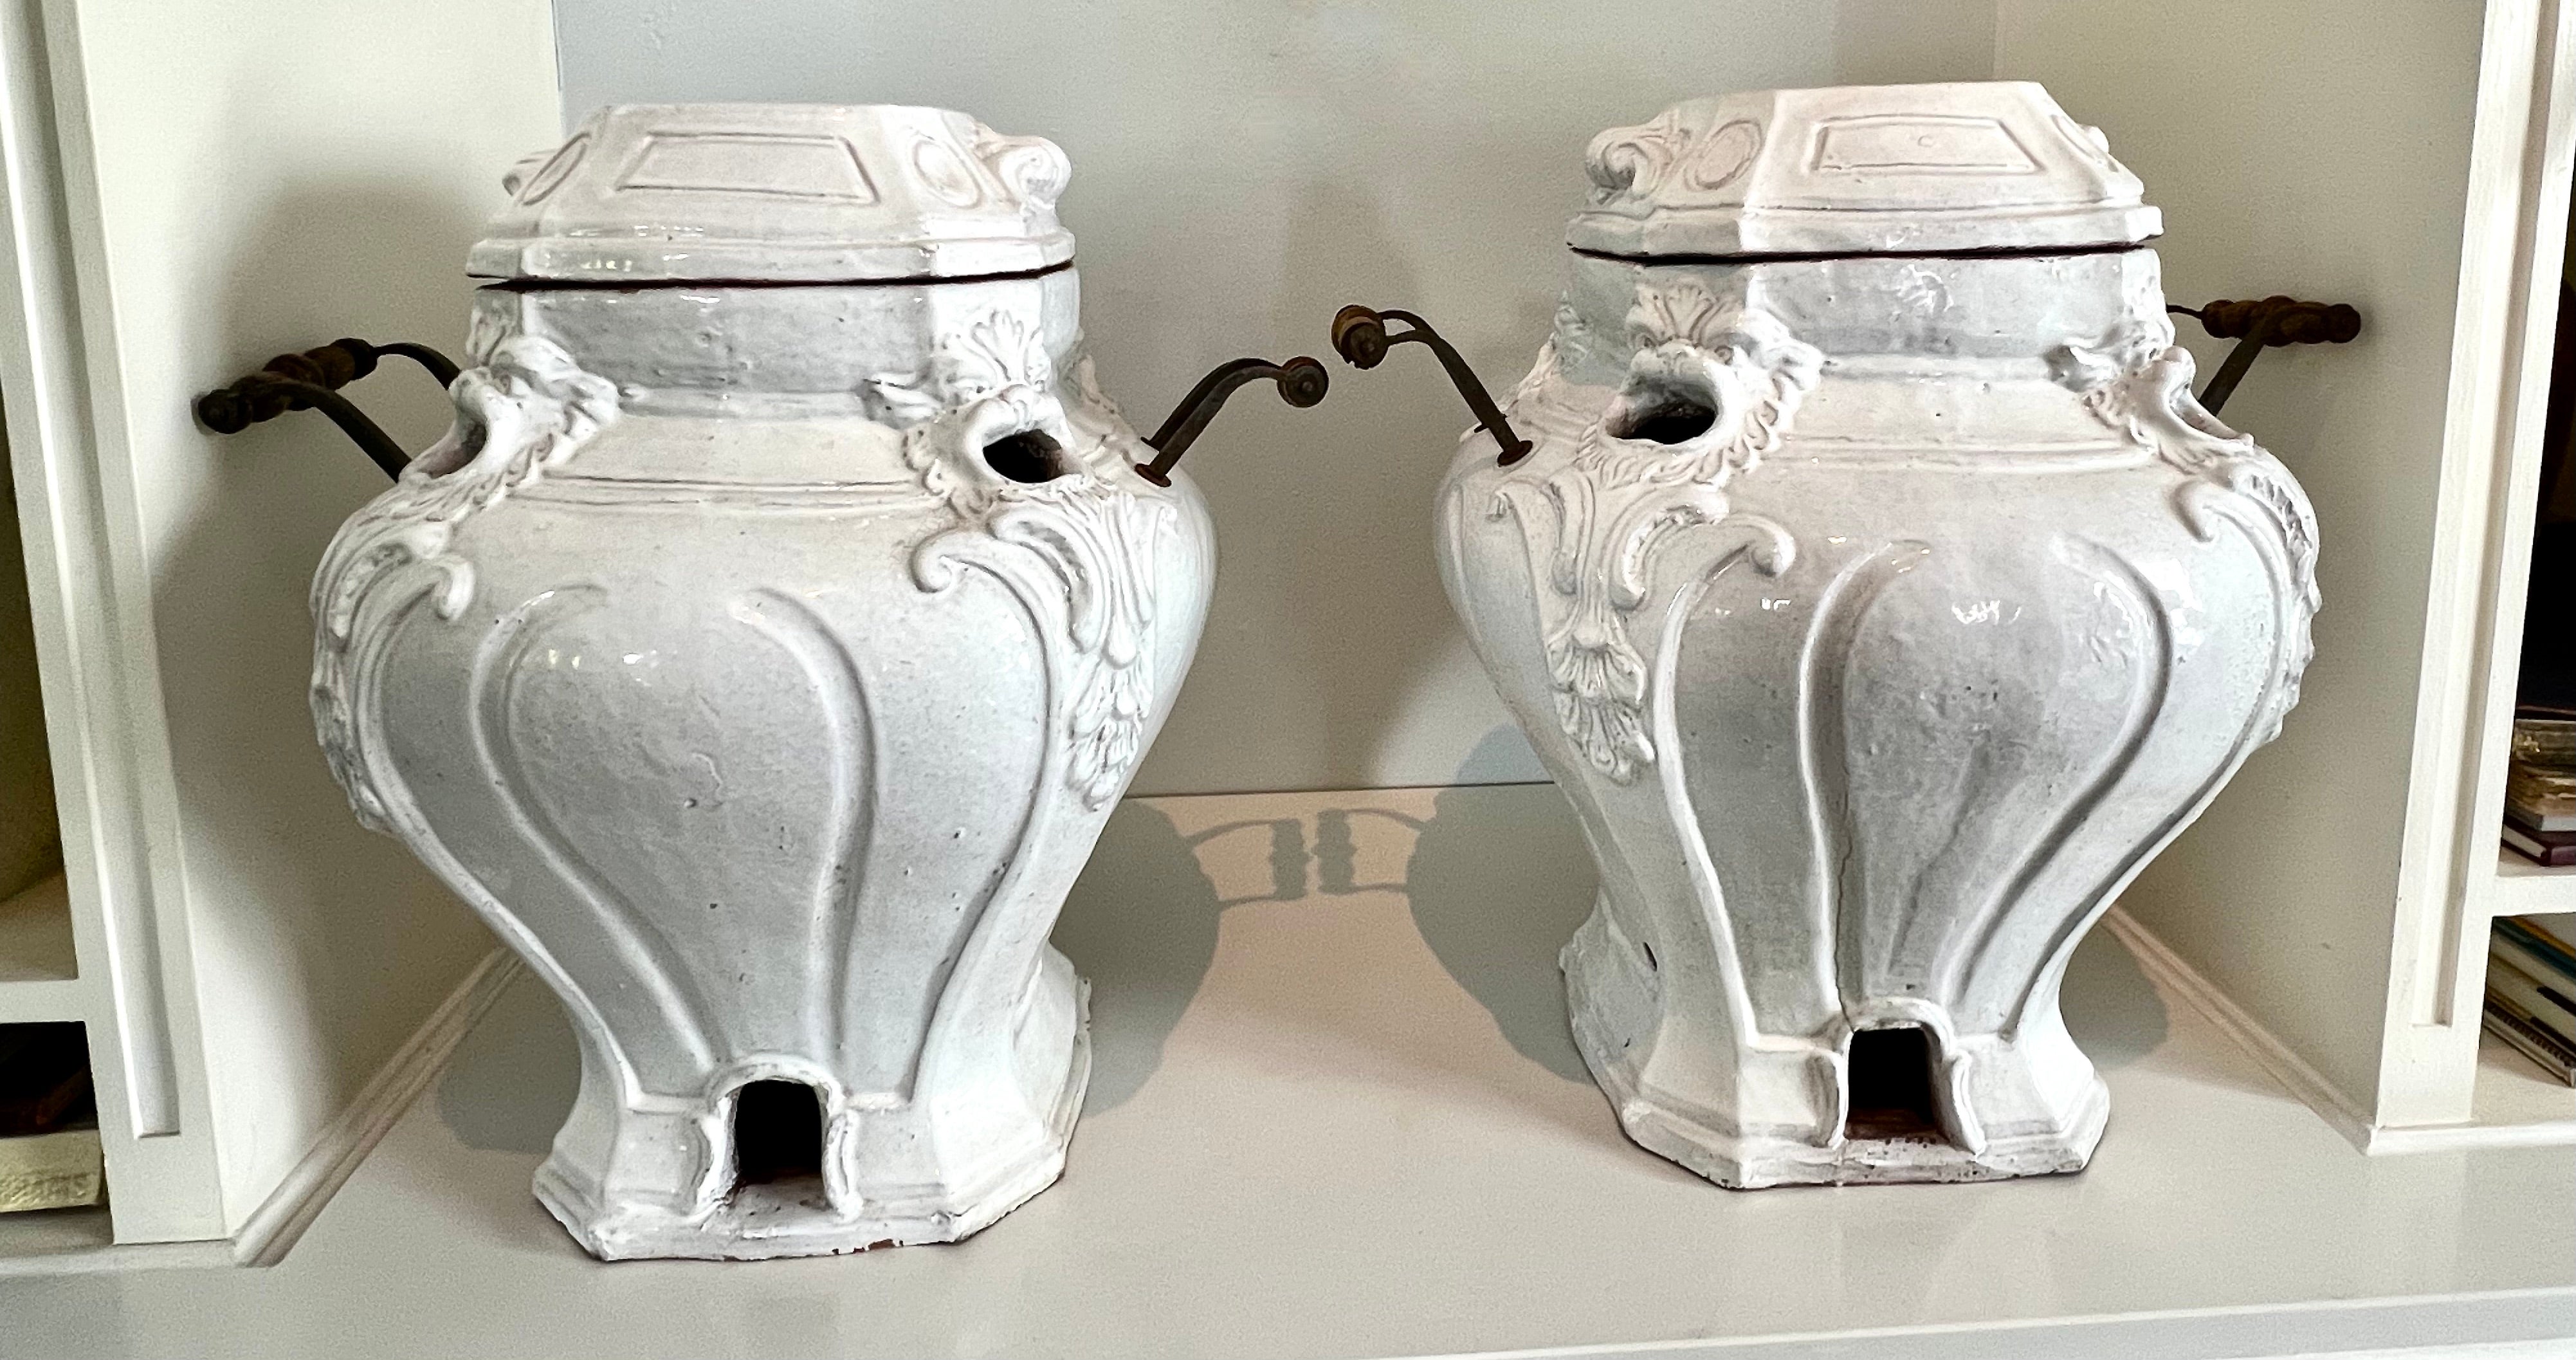 A unique pair of Glazed Terracotta planters or Urns with metal and wood handles and removable lid. The pair have a wonderful look with a opening on each corner with a carved dragon or foo face... the handles are unique in design - the lids are